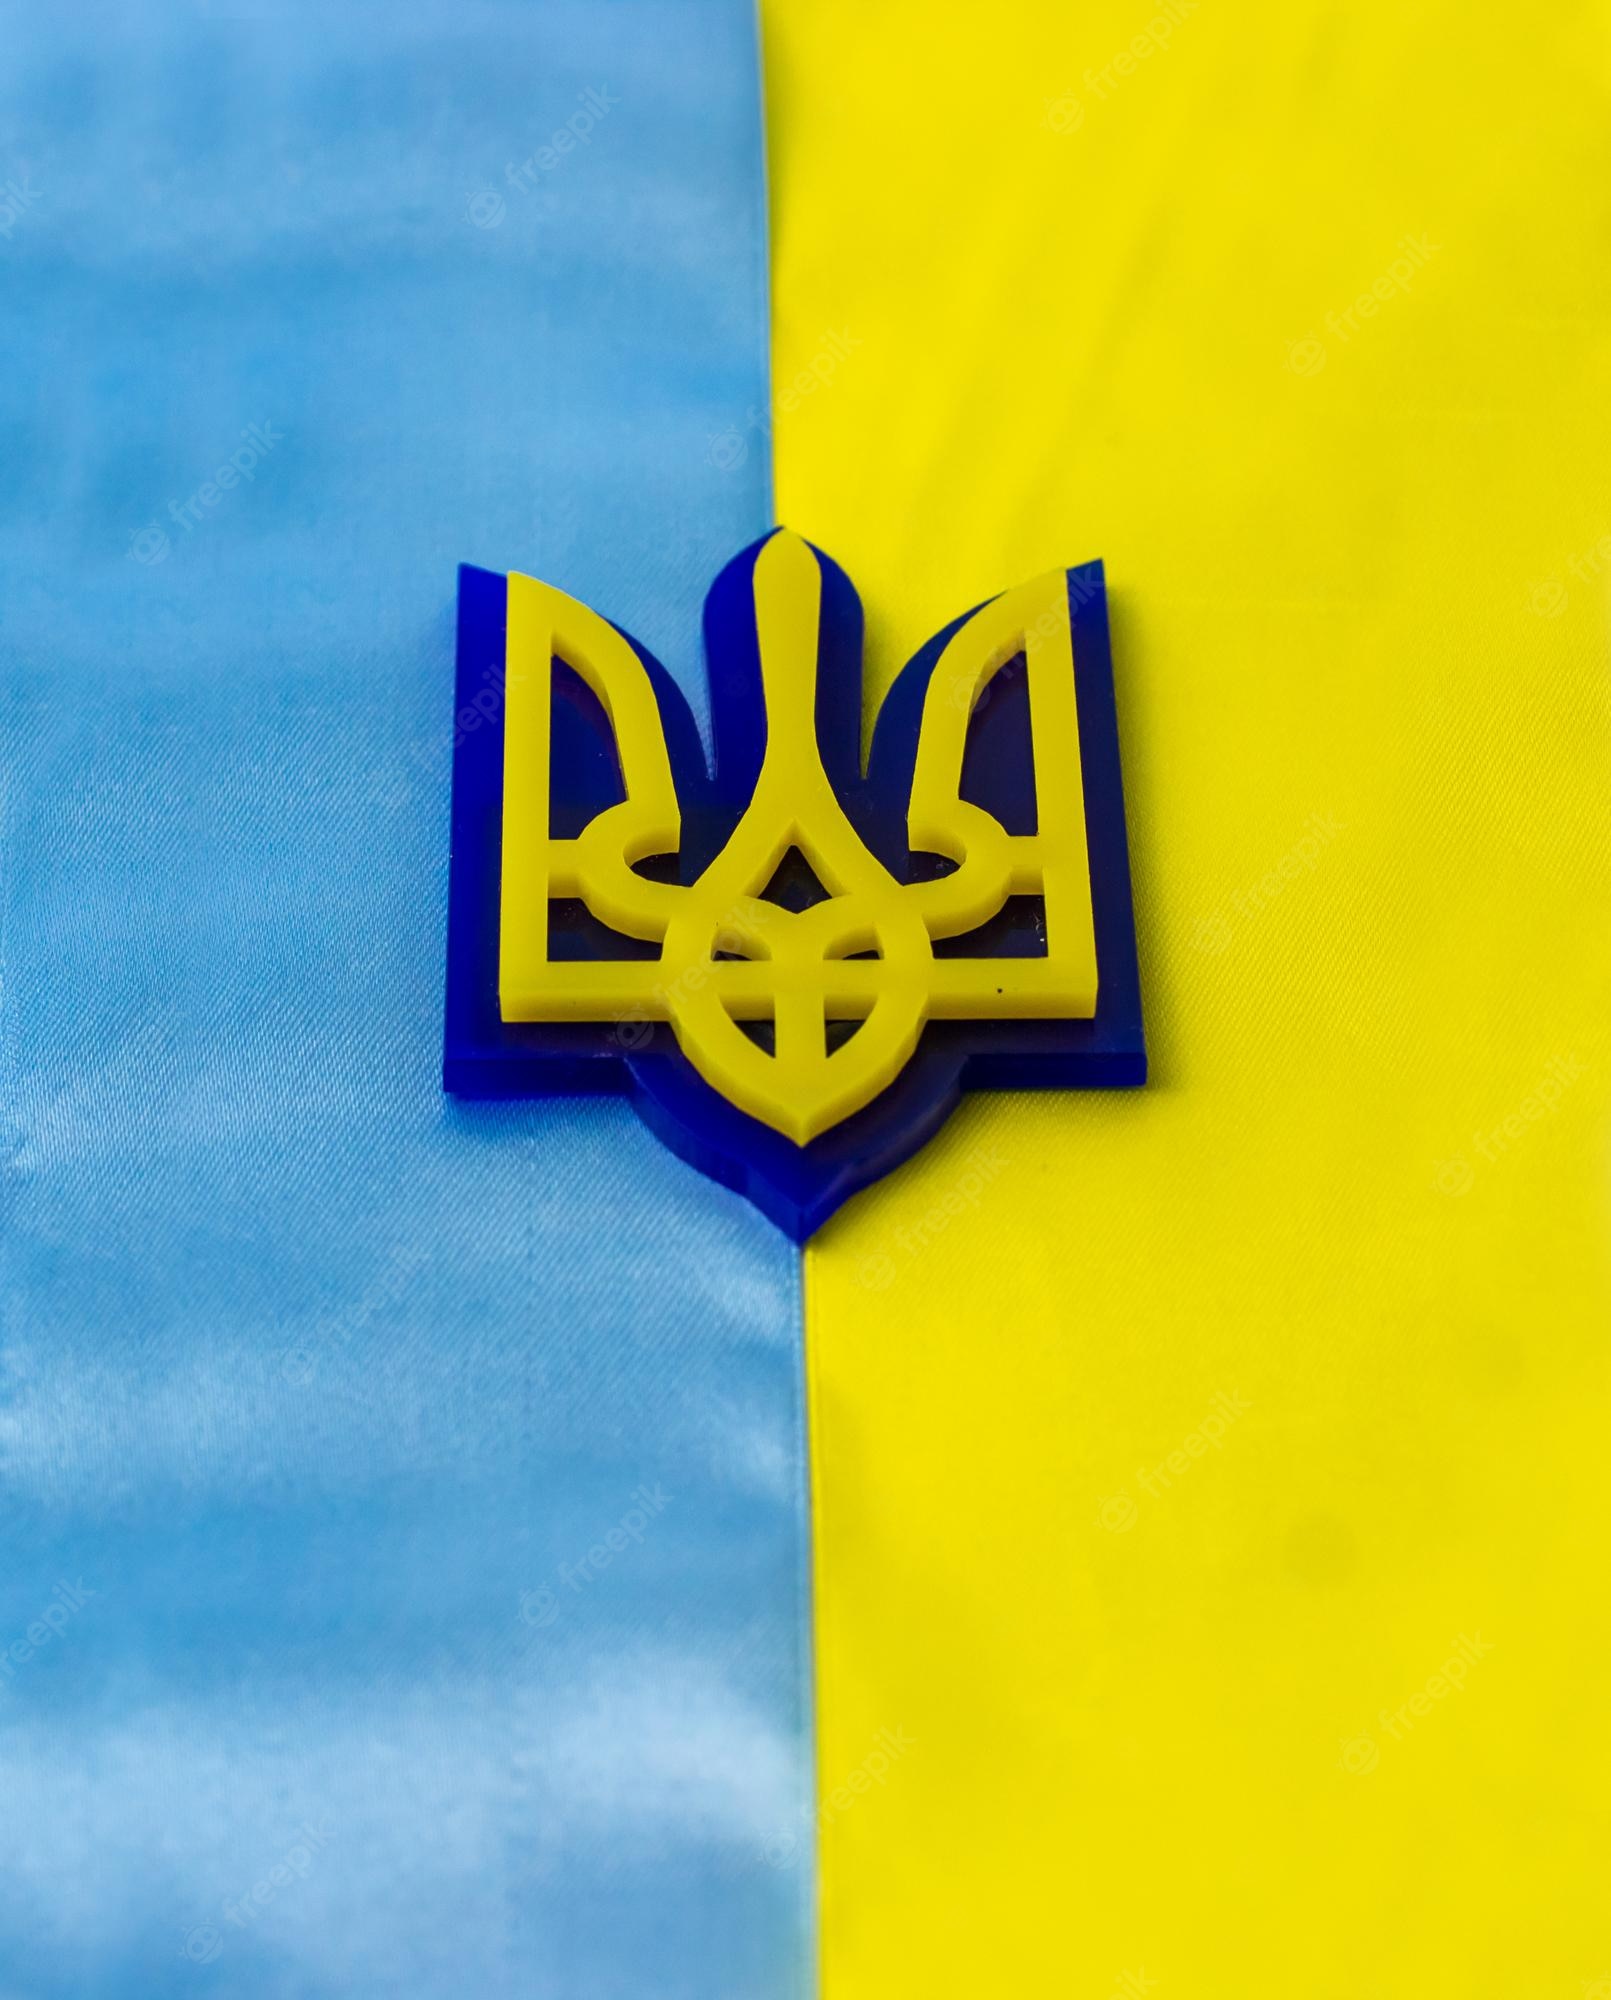 Premium Photo. Coat of arms of ukraine on the background of the flag flag of blue and yellow stripes